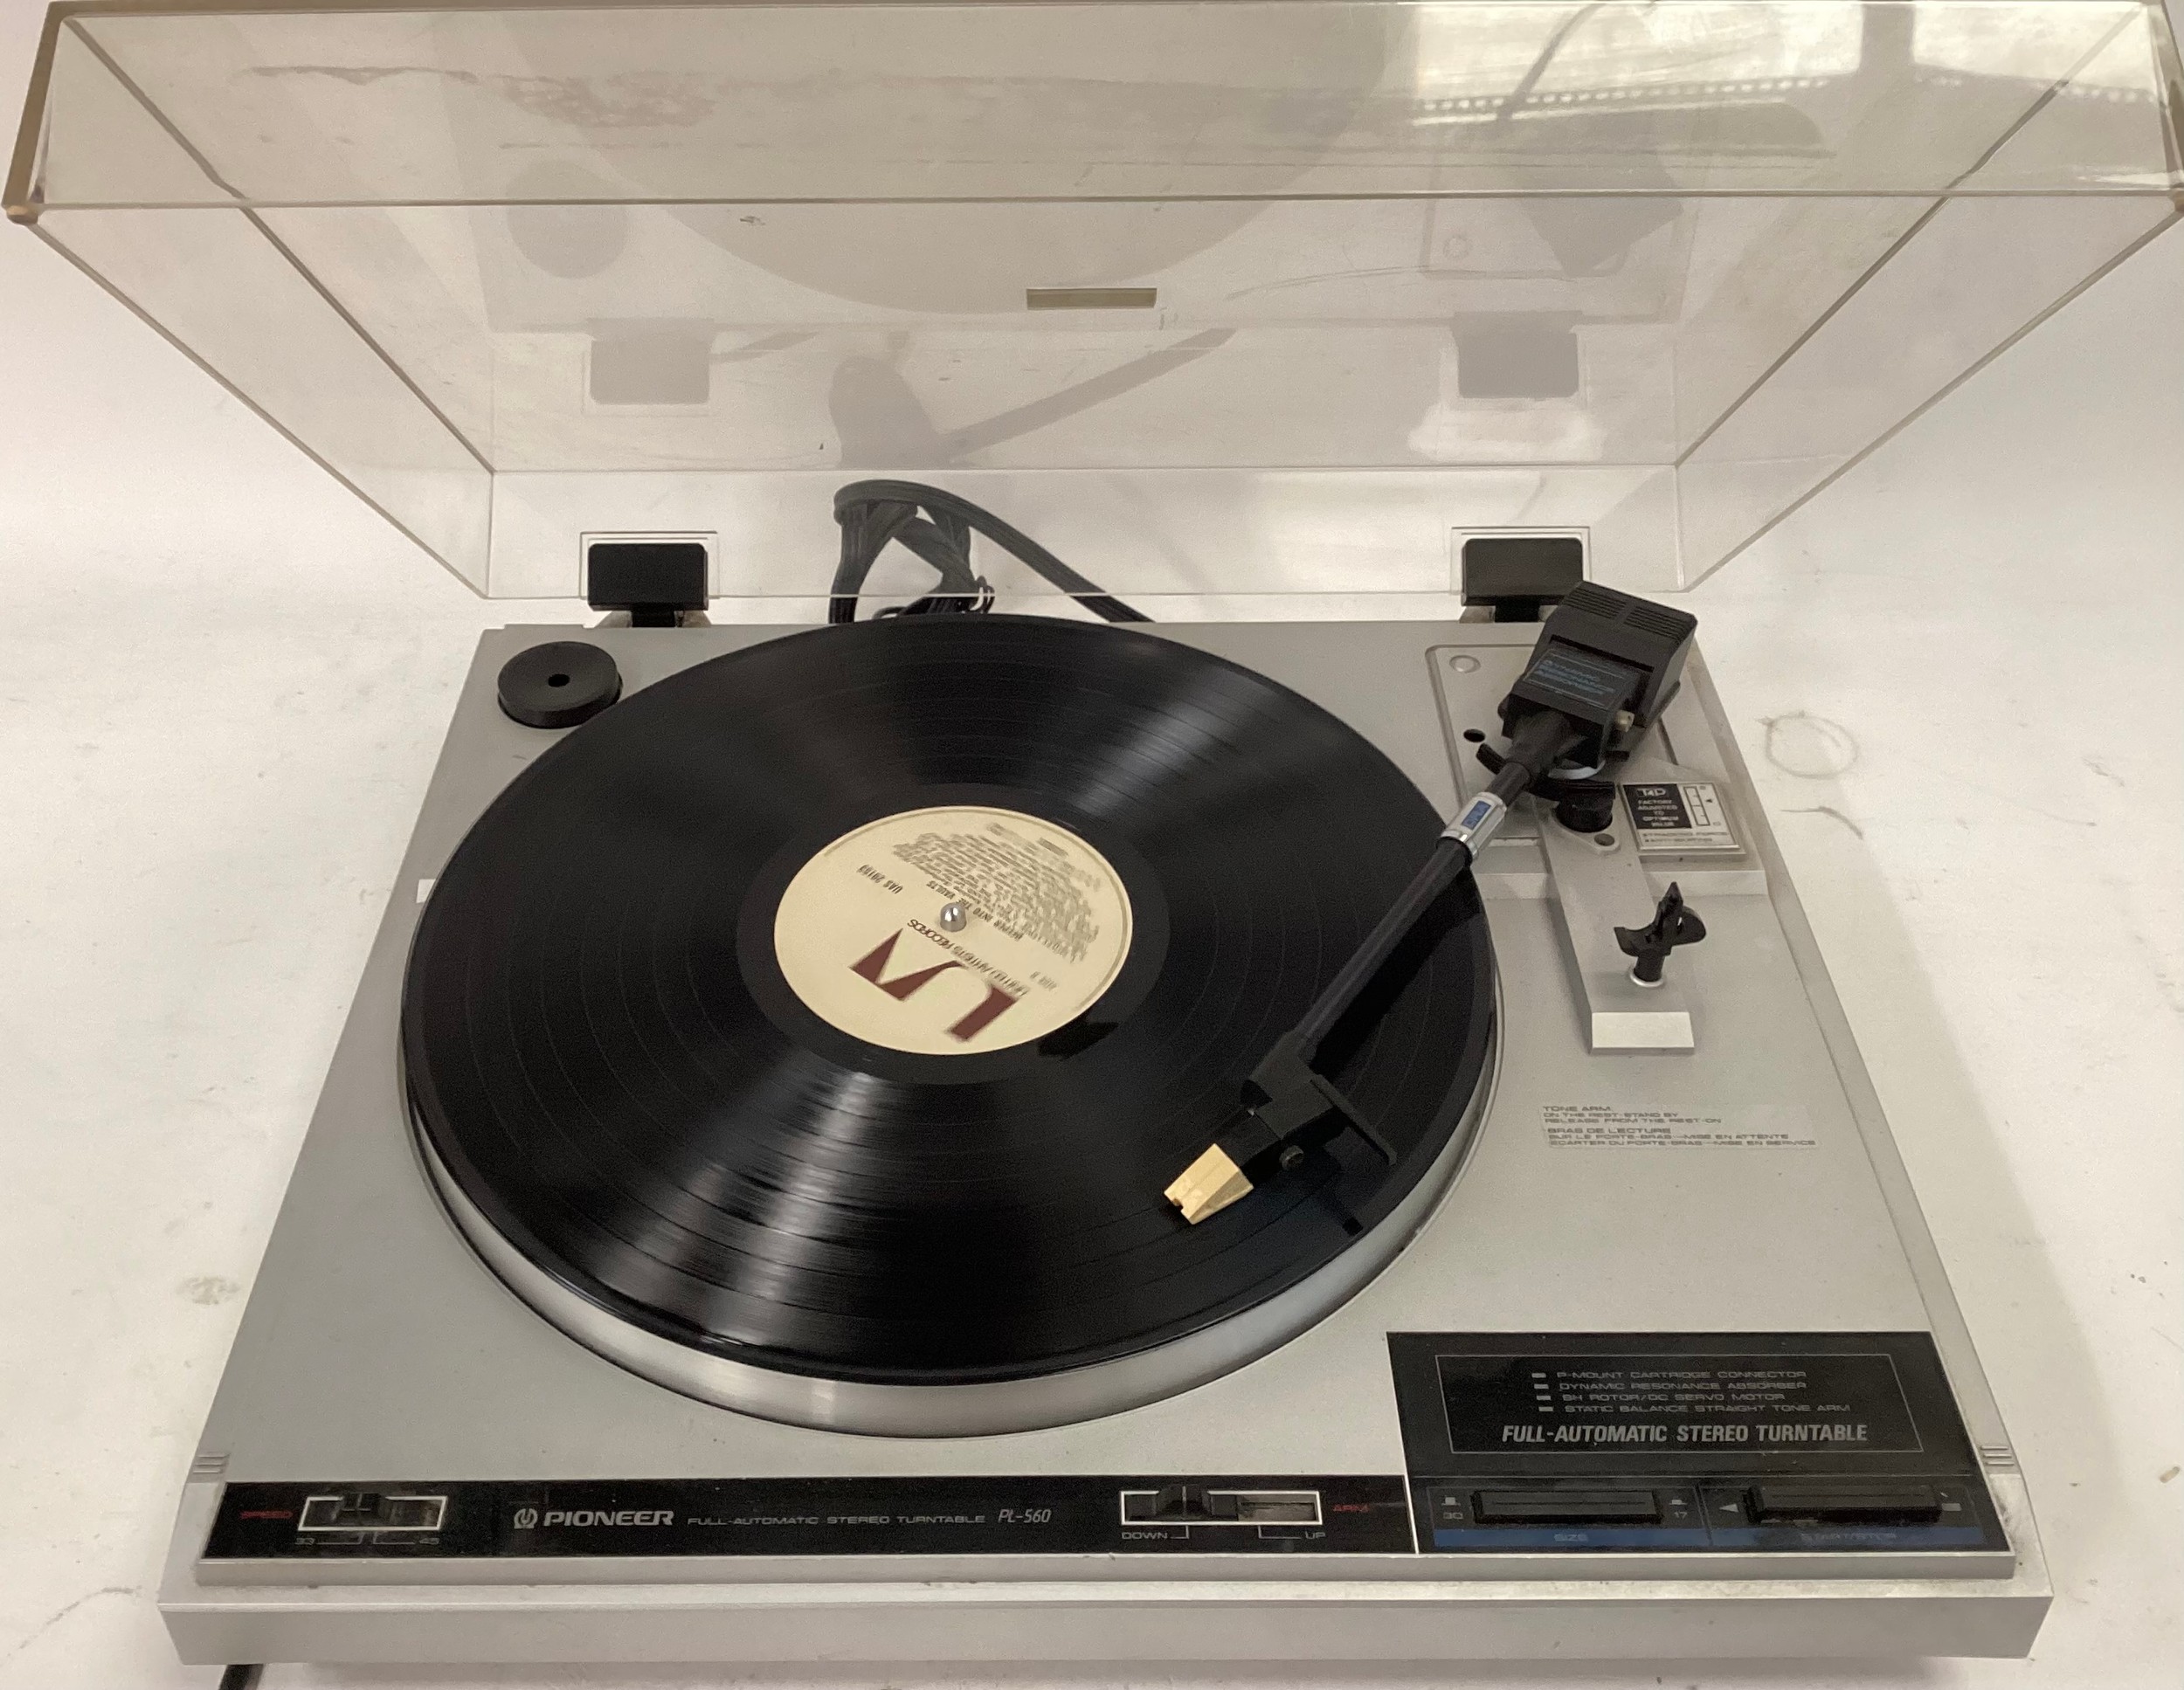 PIONEER STEREO TURNTABLE PL-560. This is a belt drive semi automatic turntable. Powers up and